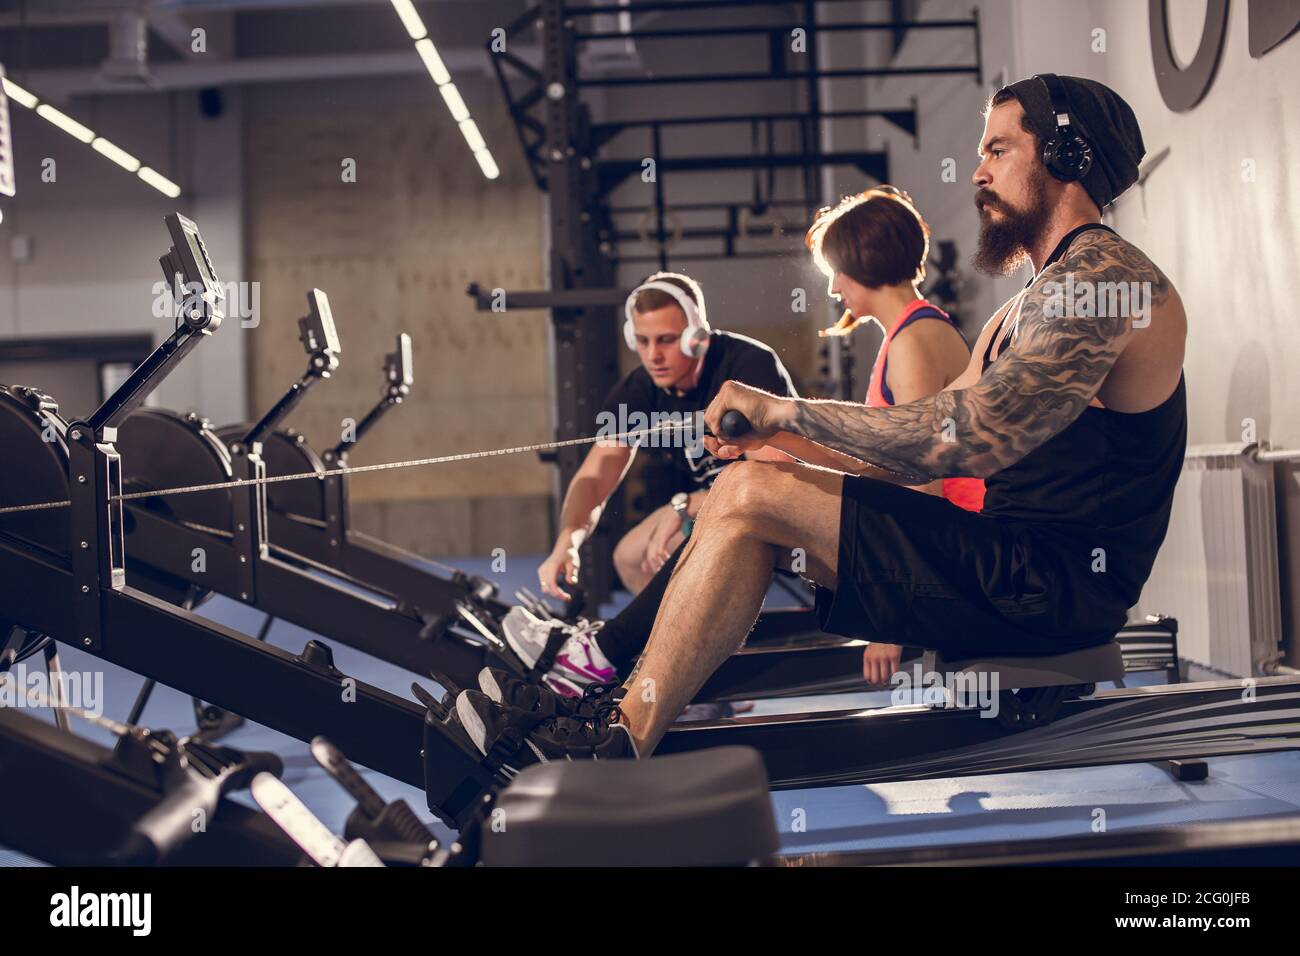 Mid section of people exercising on rowing machine at gym Stock Photo